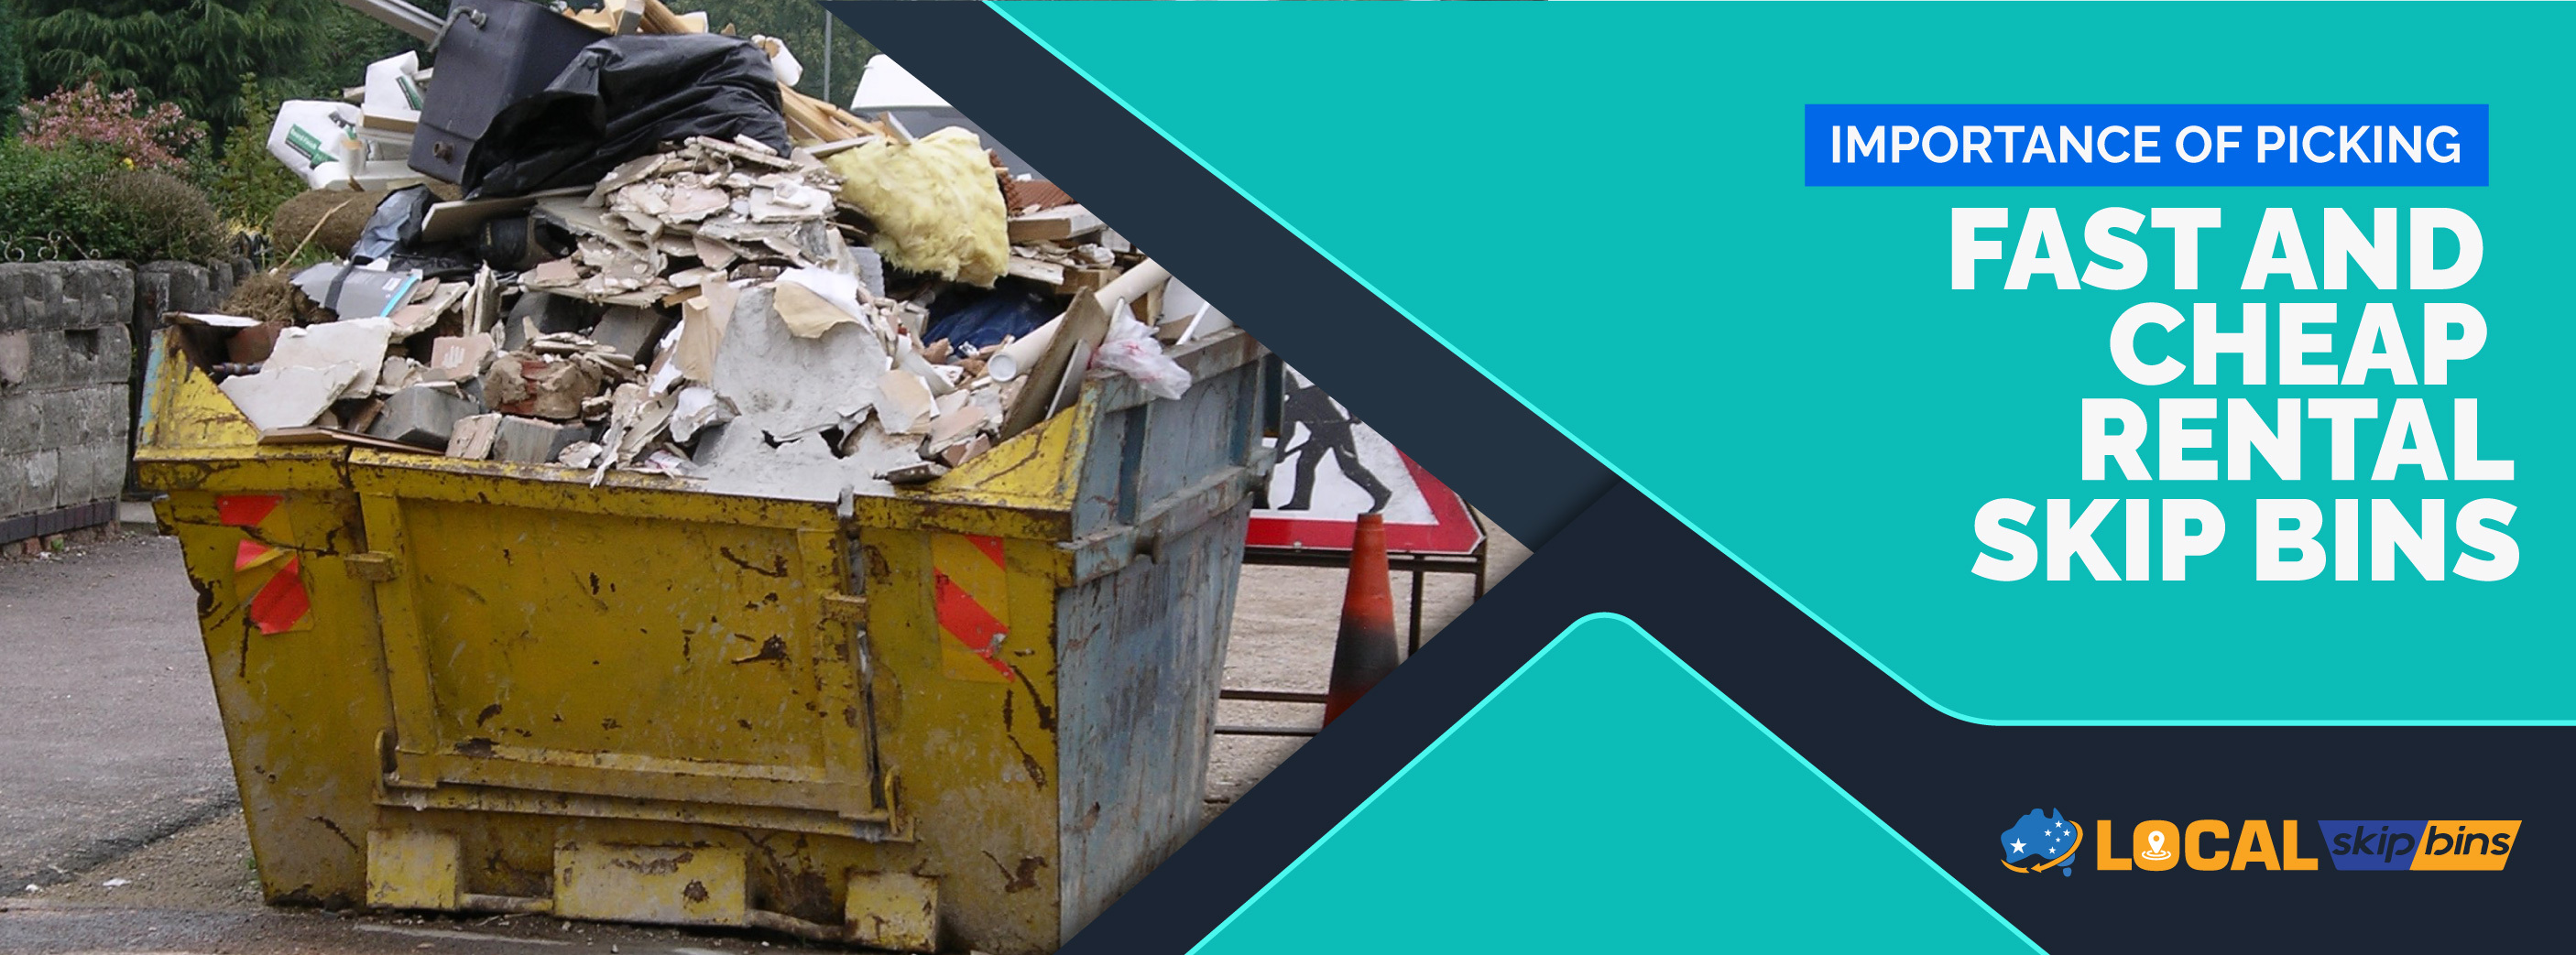 The use of a professional skip bin is an efficient, economical, and environmentally friendly way of disposing of rubbish.